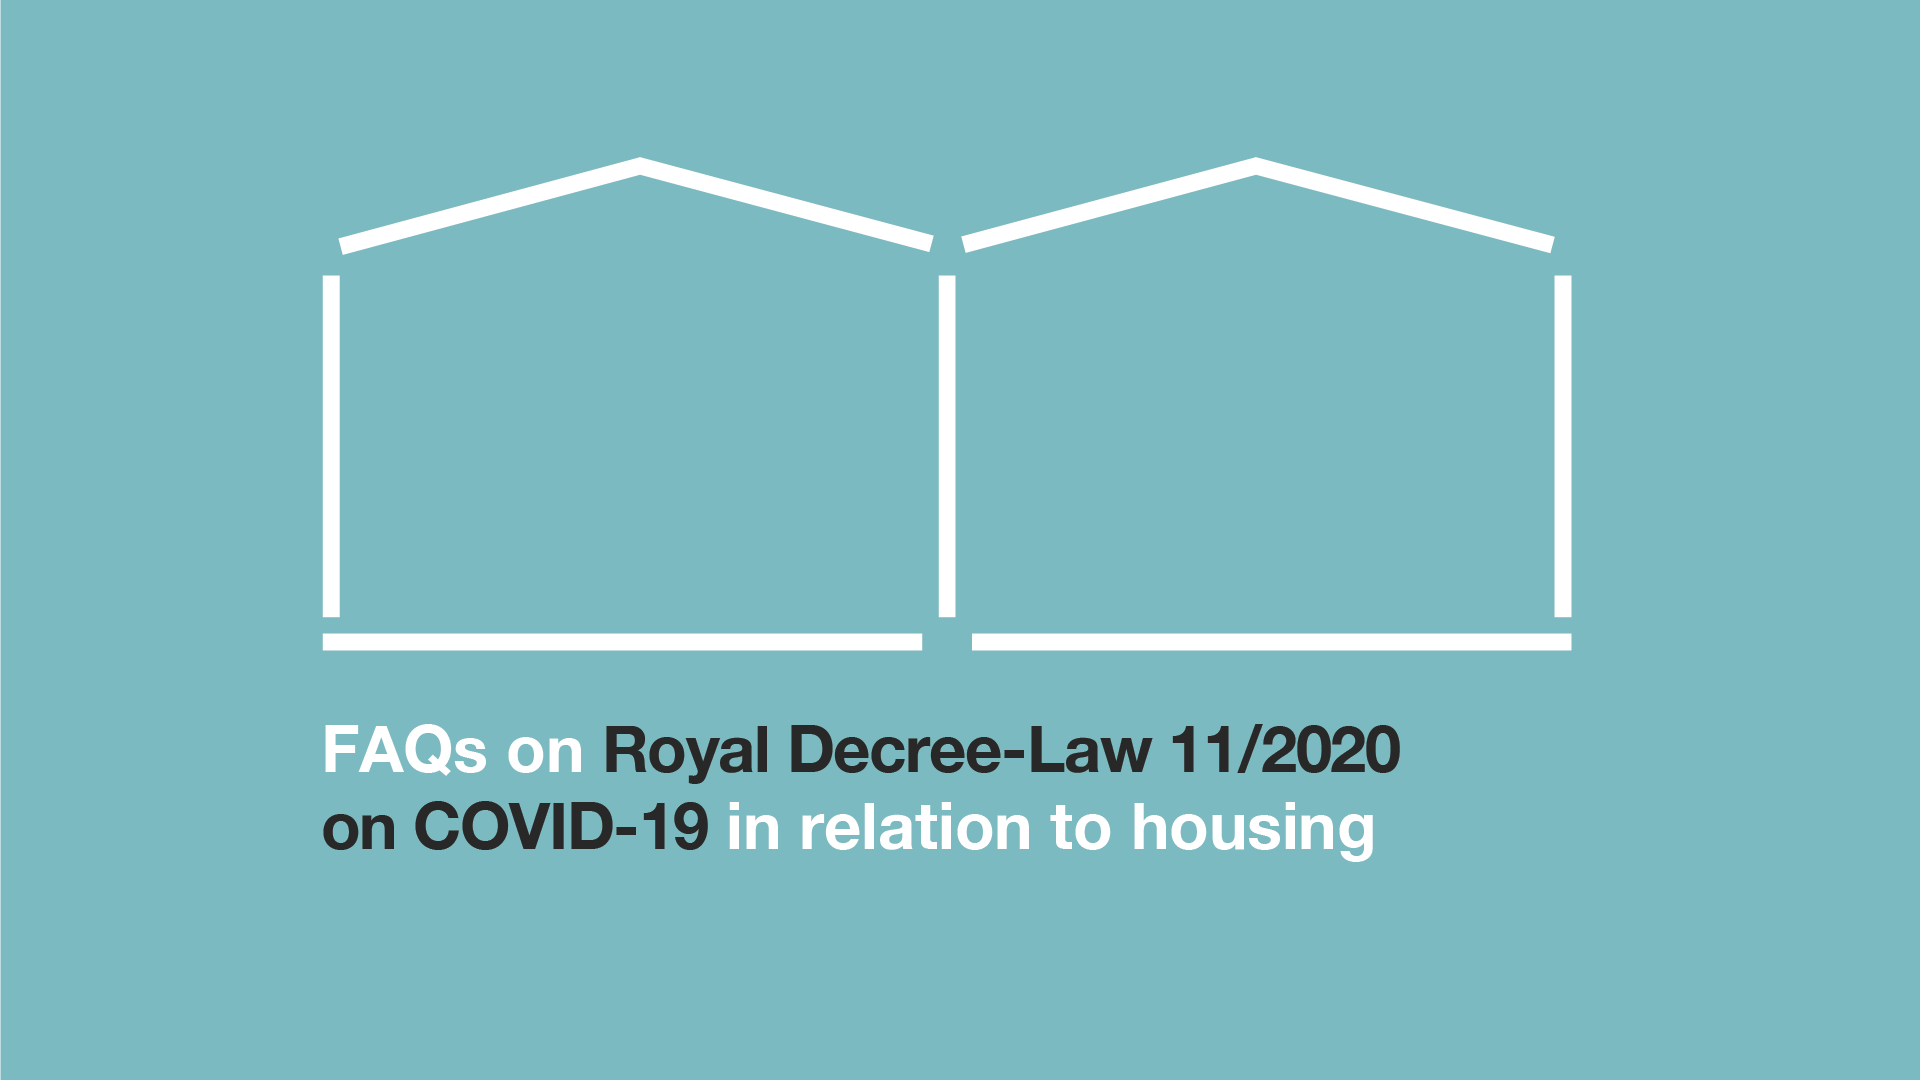 FAQs on housing affected by the COVID-19 crisis